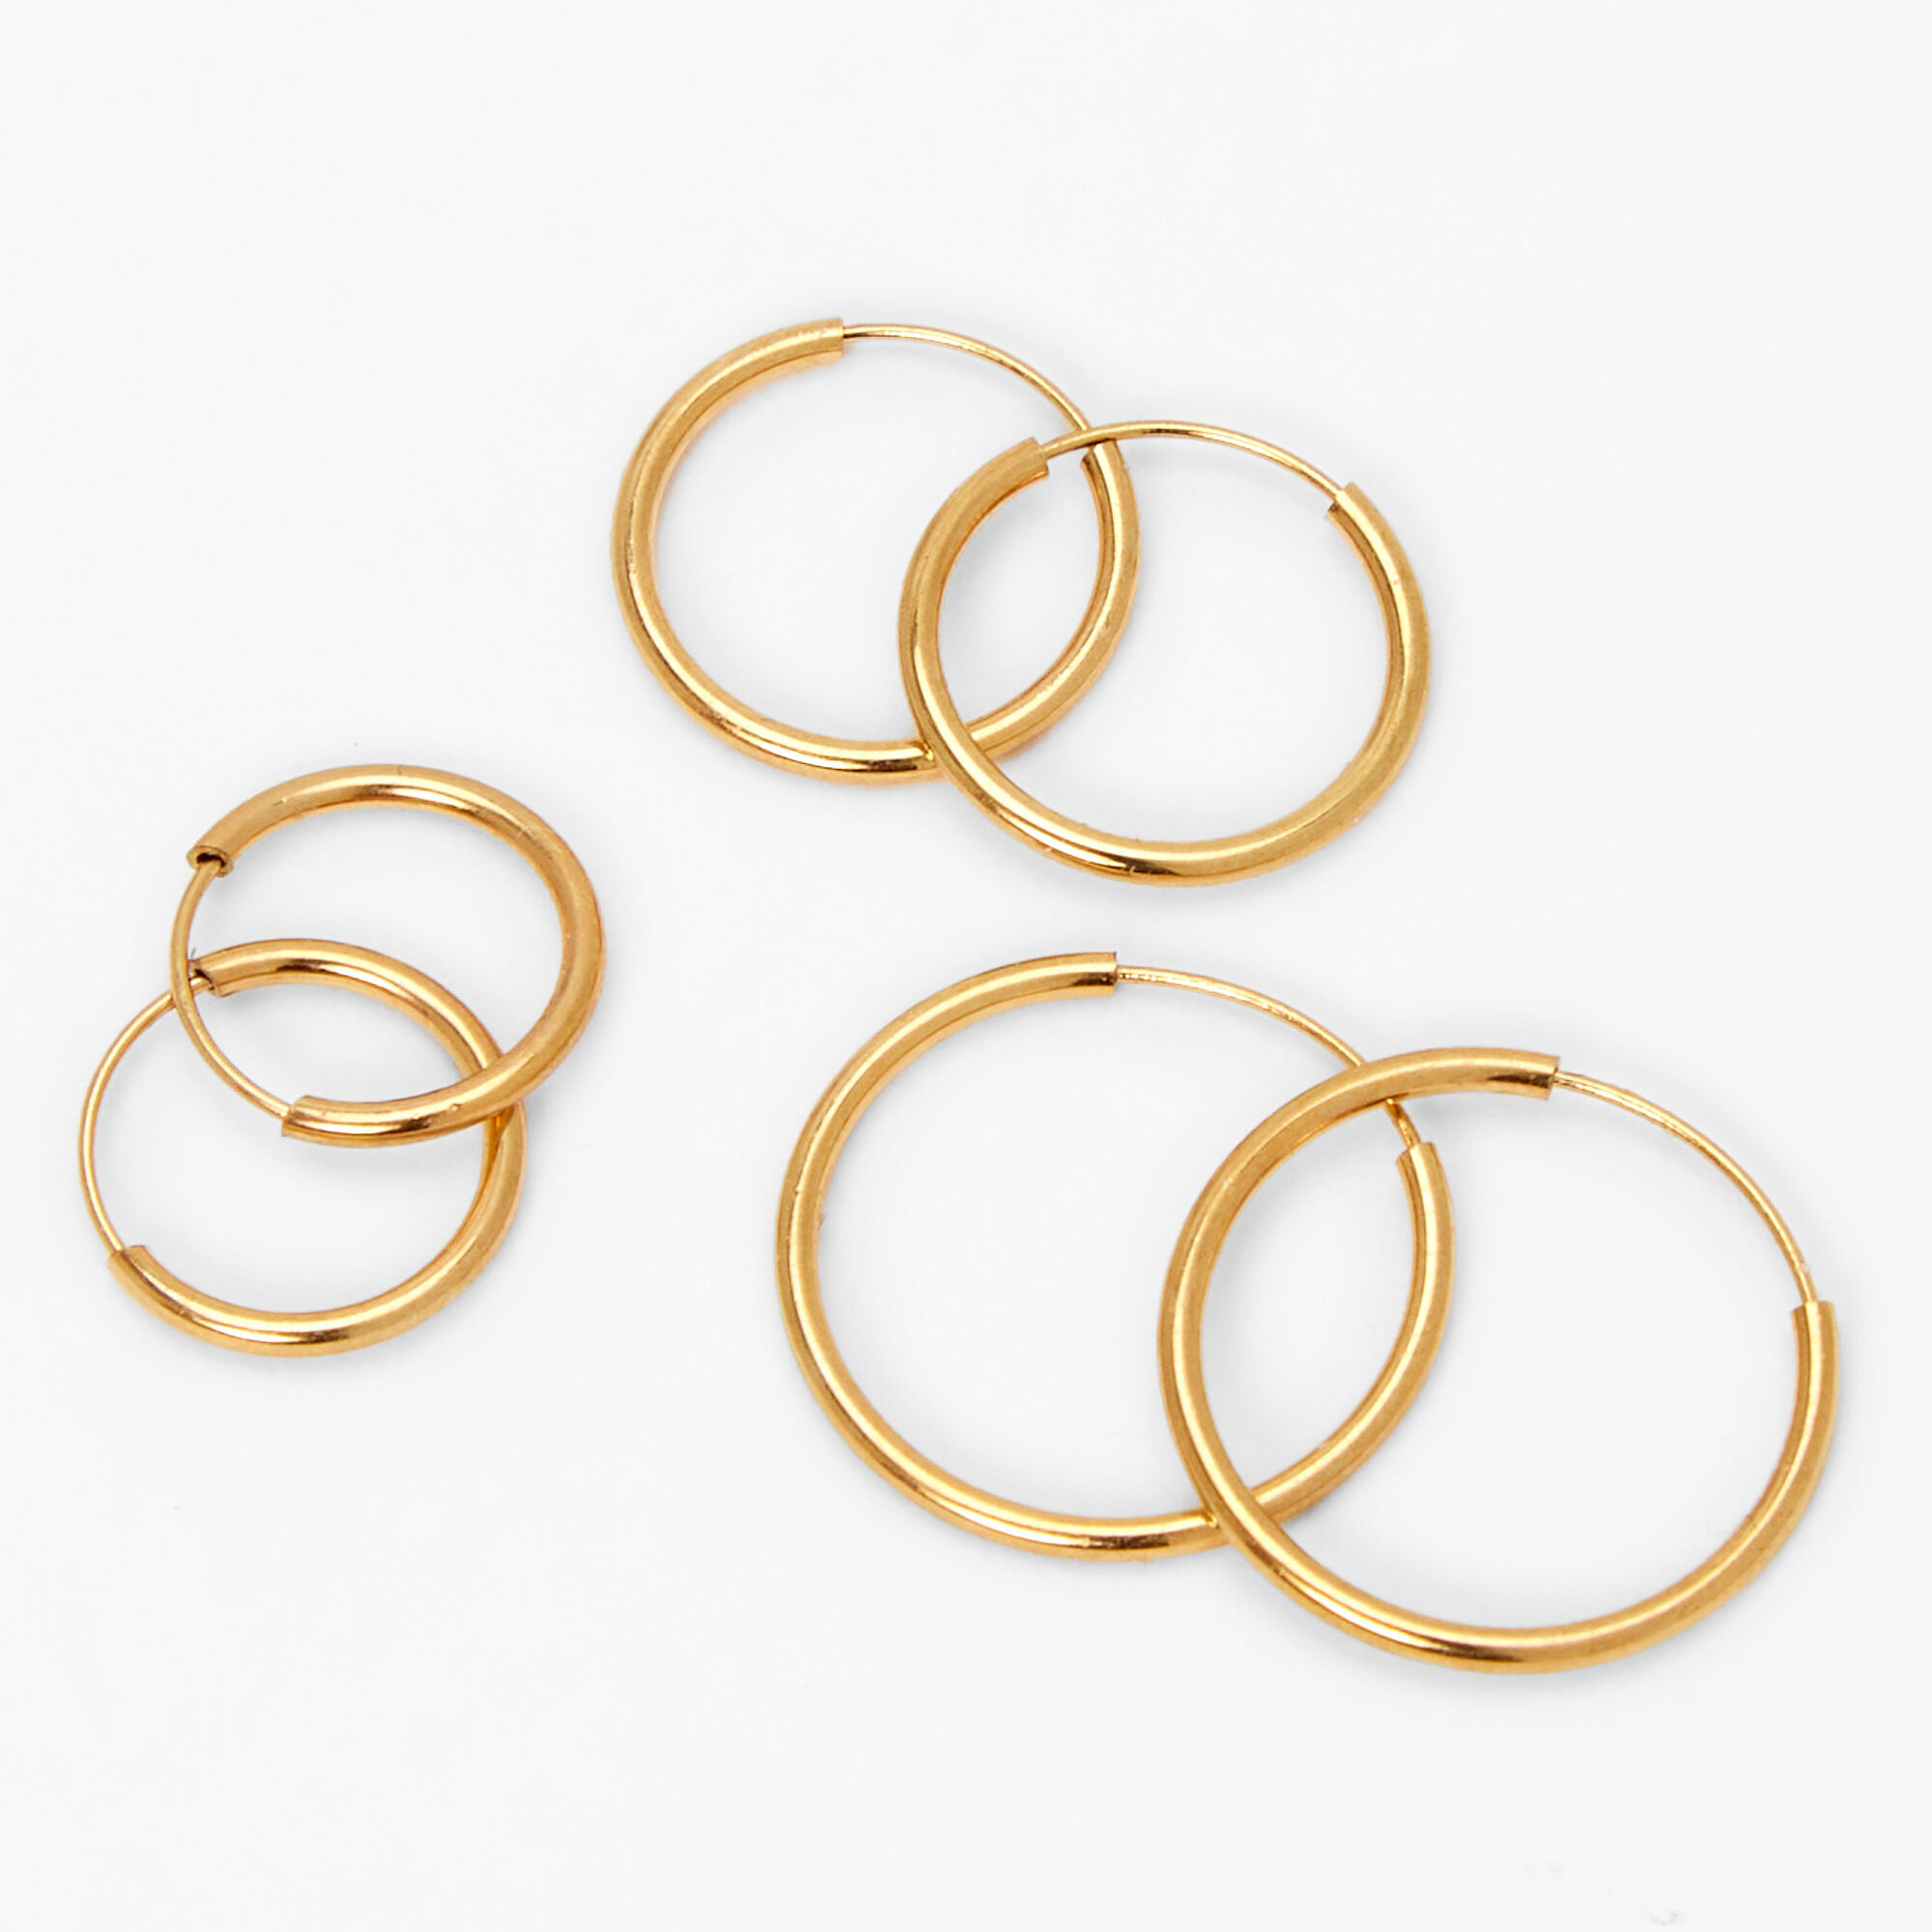 View Claires 18Ct Plated Graduated Hoop Earrings 3 Pack Gold information